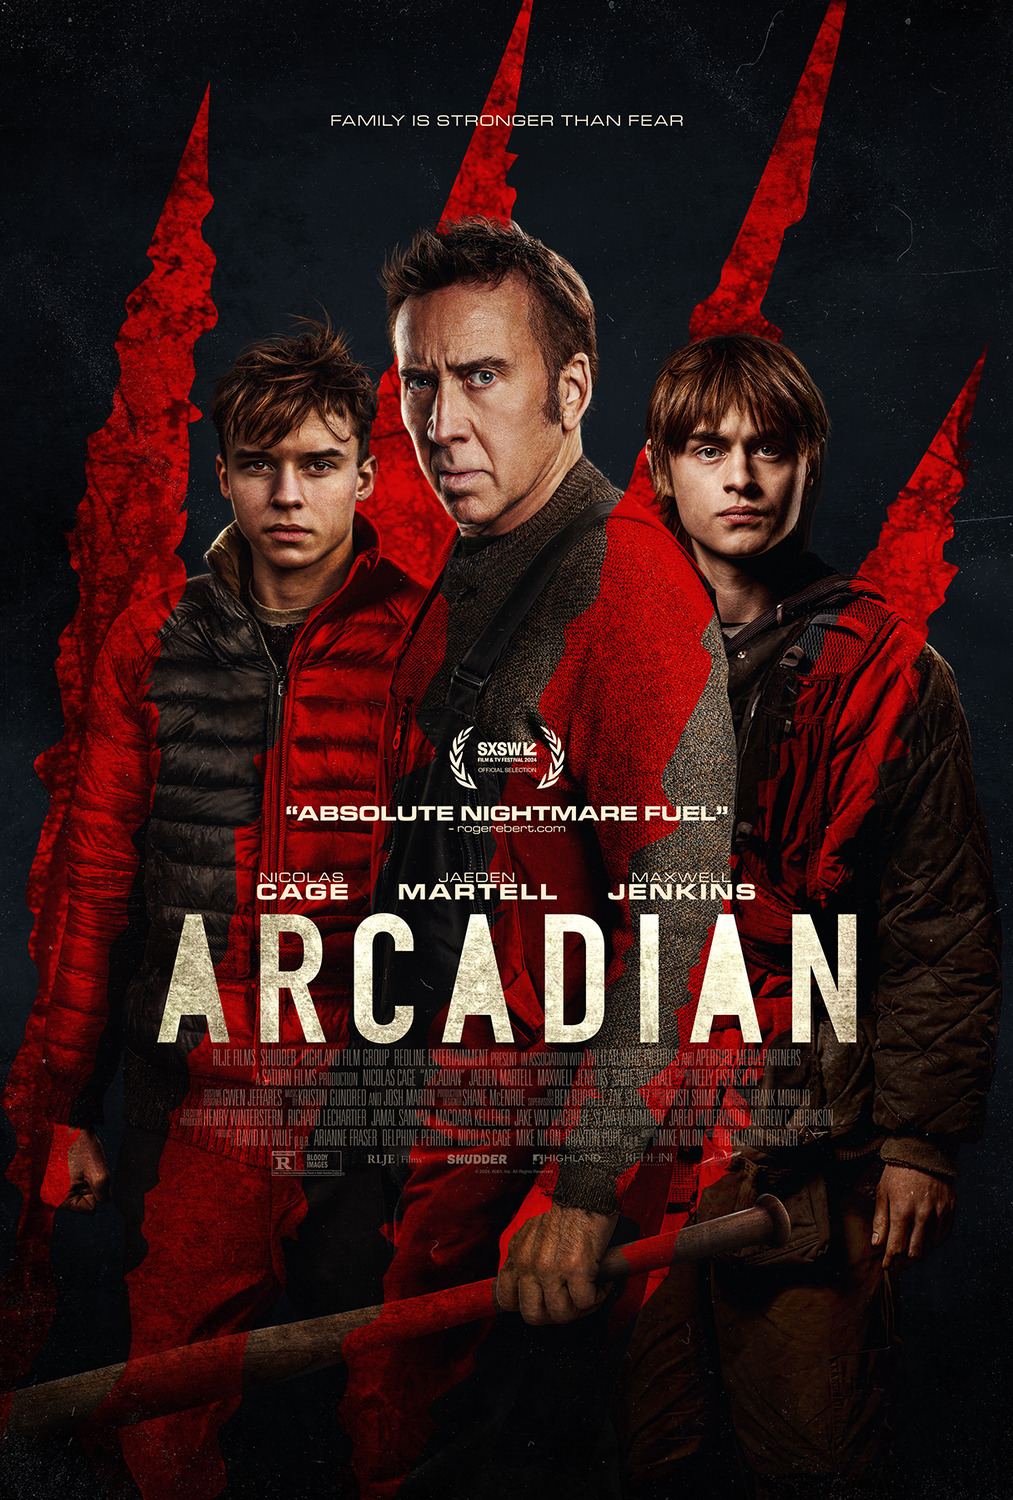 Arcadian Review — Characters shine in apocalyptic world